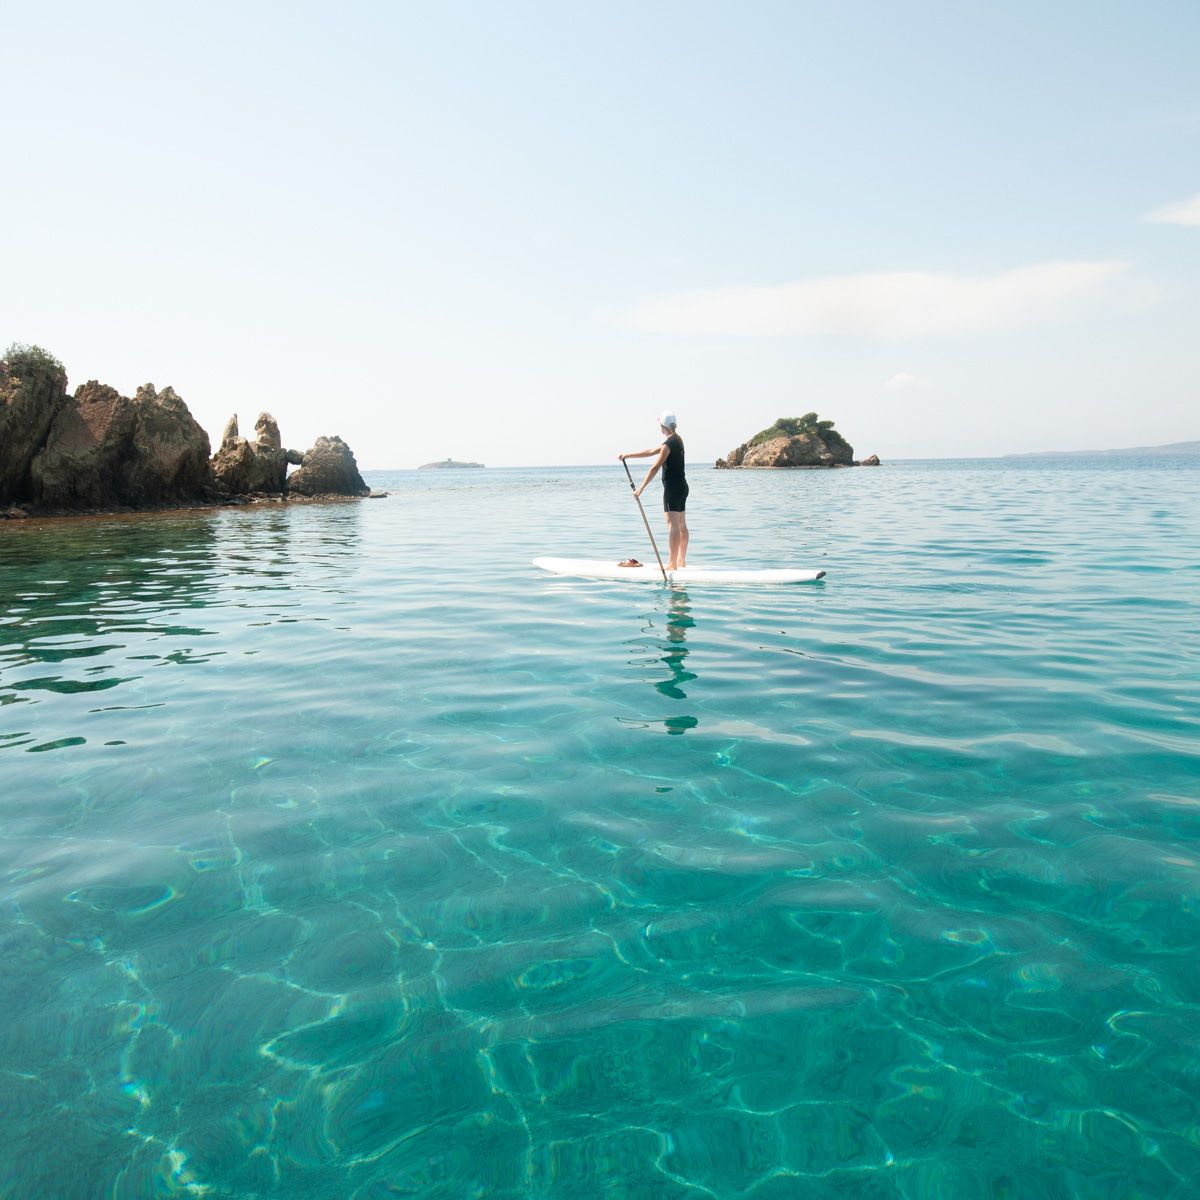 paddle boarder in turquoise colored waters of Balikasiran